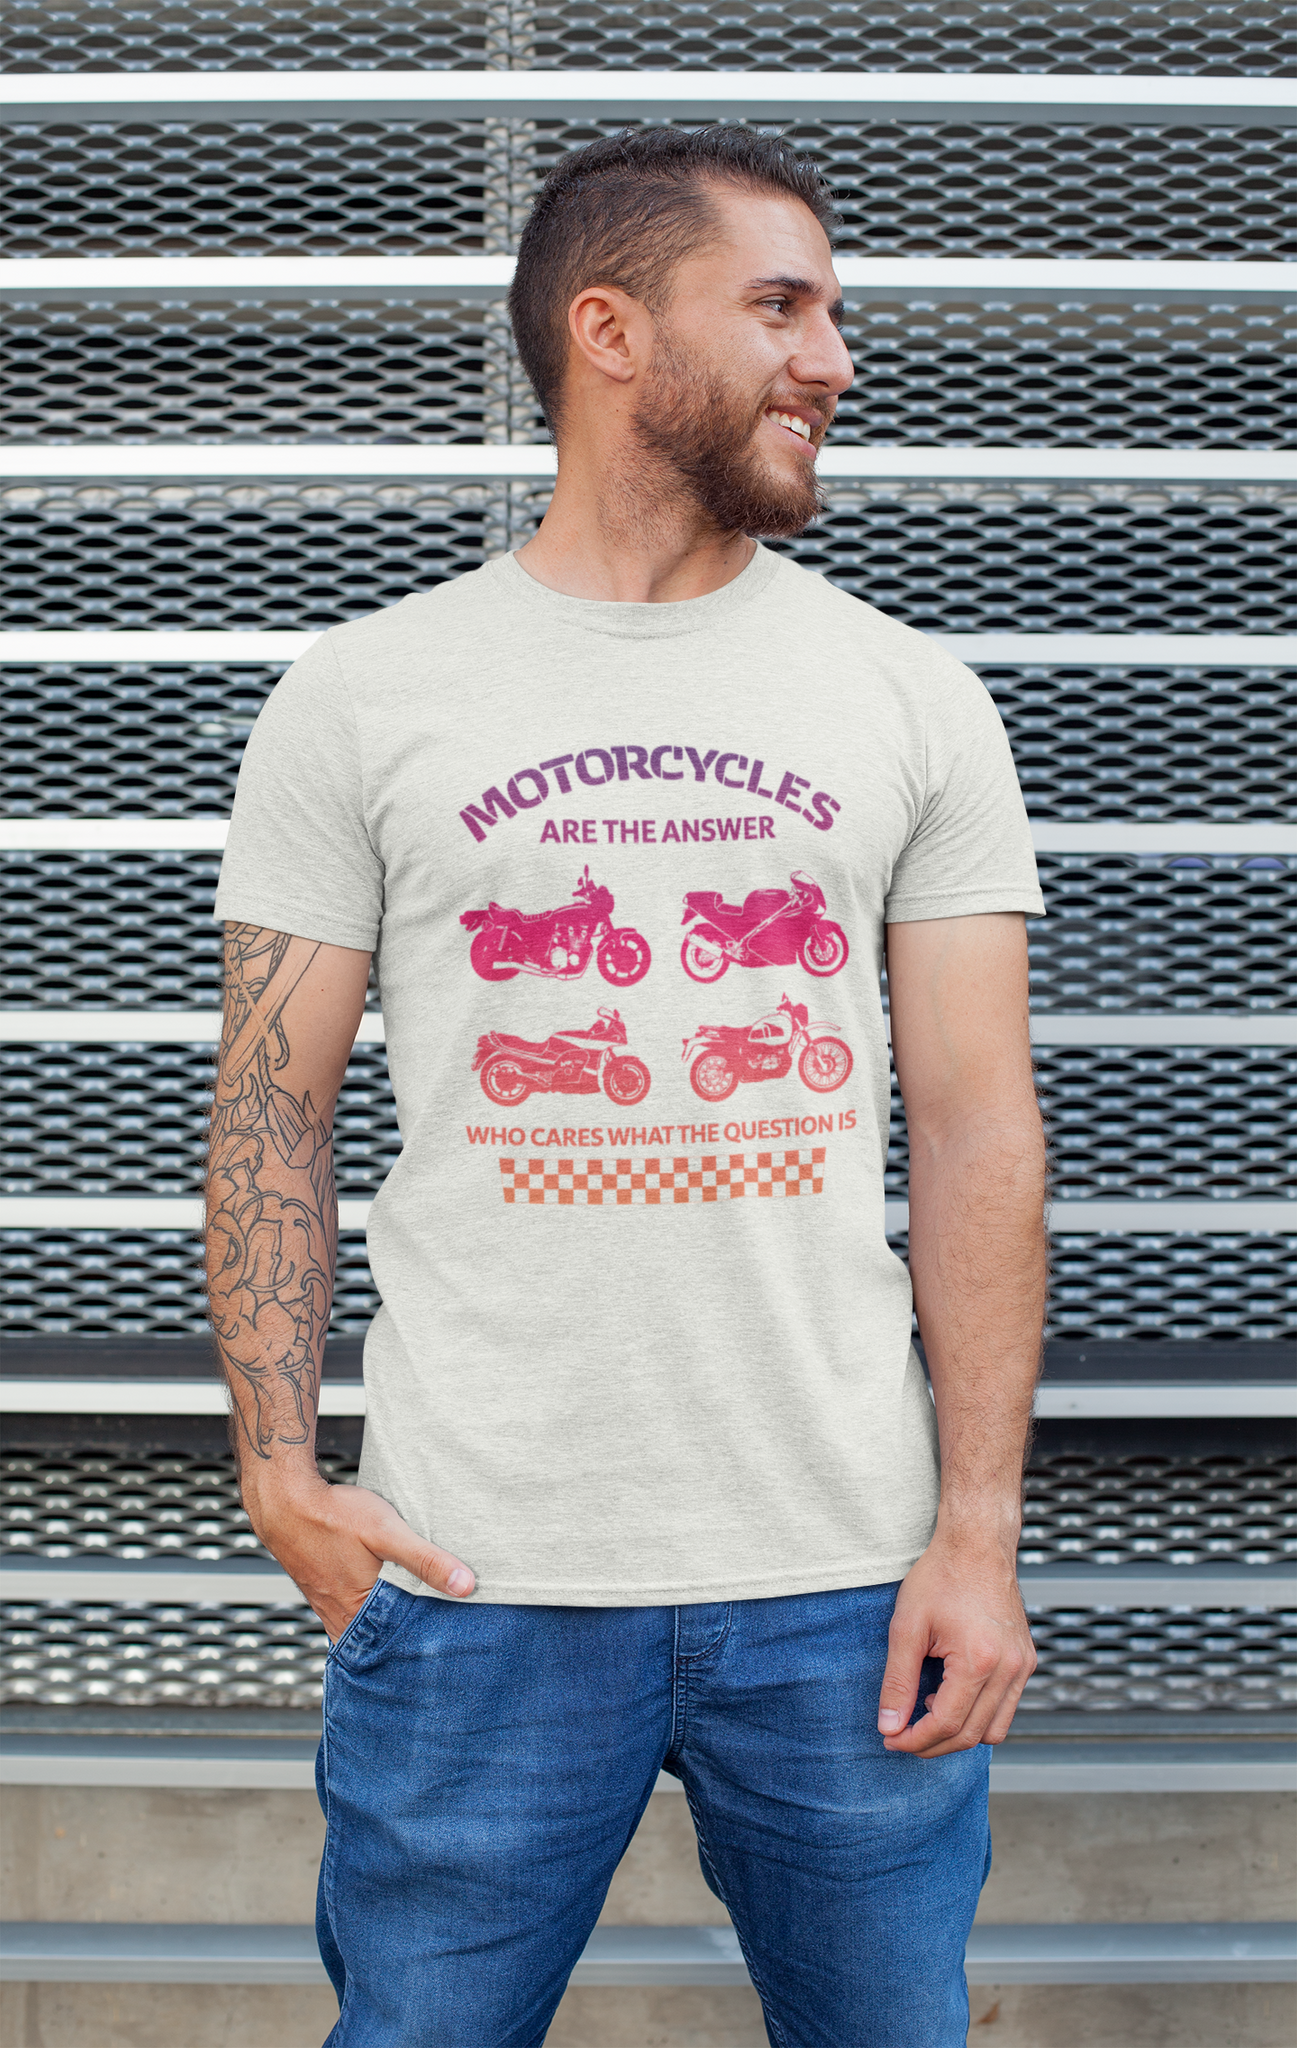 "Motorcycles Are the Answer" Tee Shirt - Red Gradient